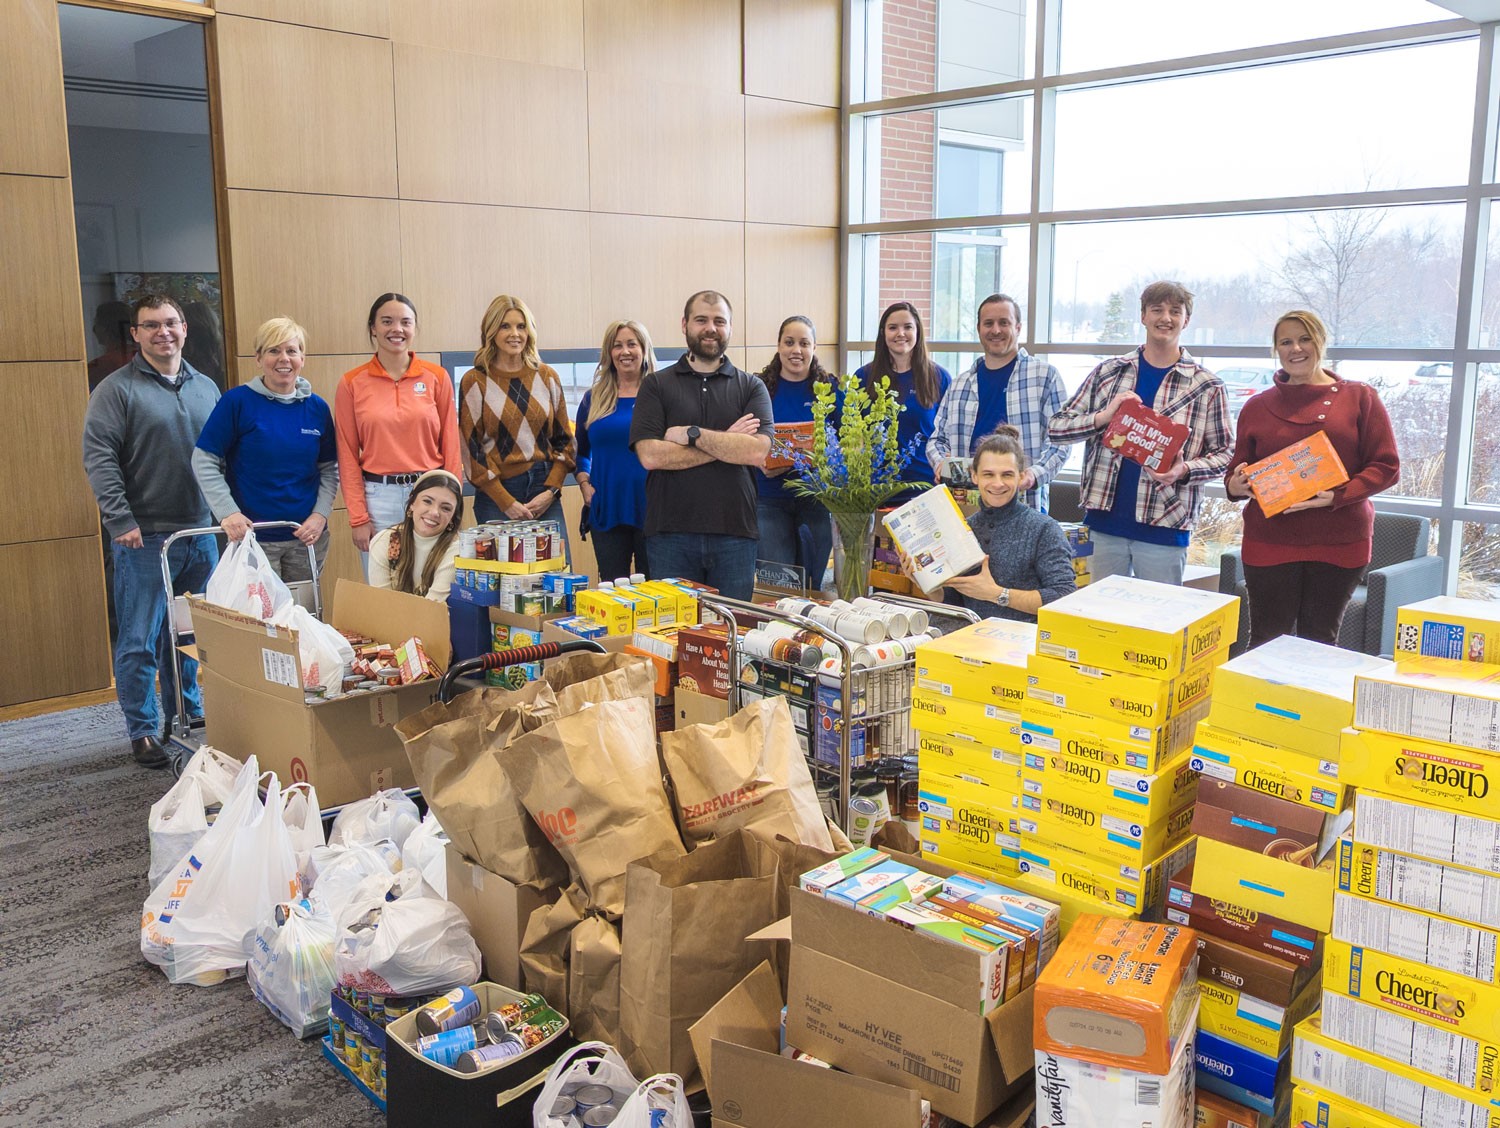 Merchants' associates collected and donated 2,285 lbs. of food for the Food Bank of Iowa.